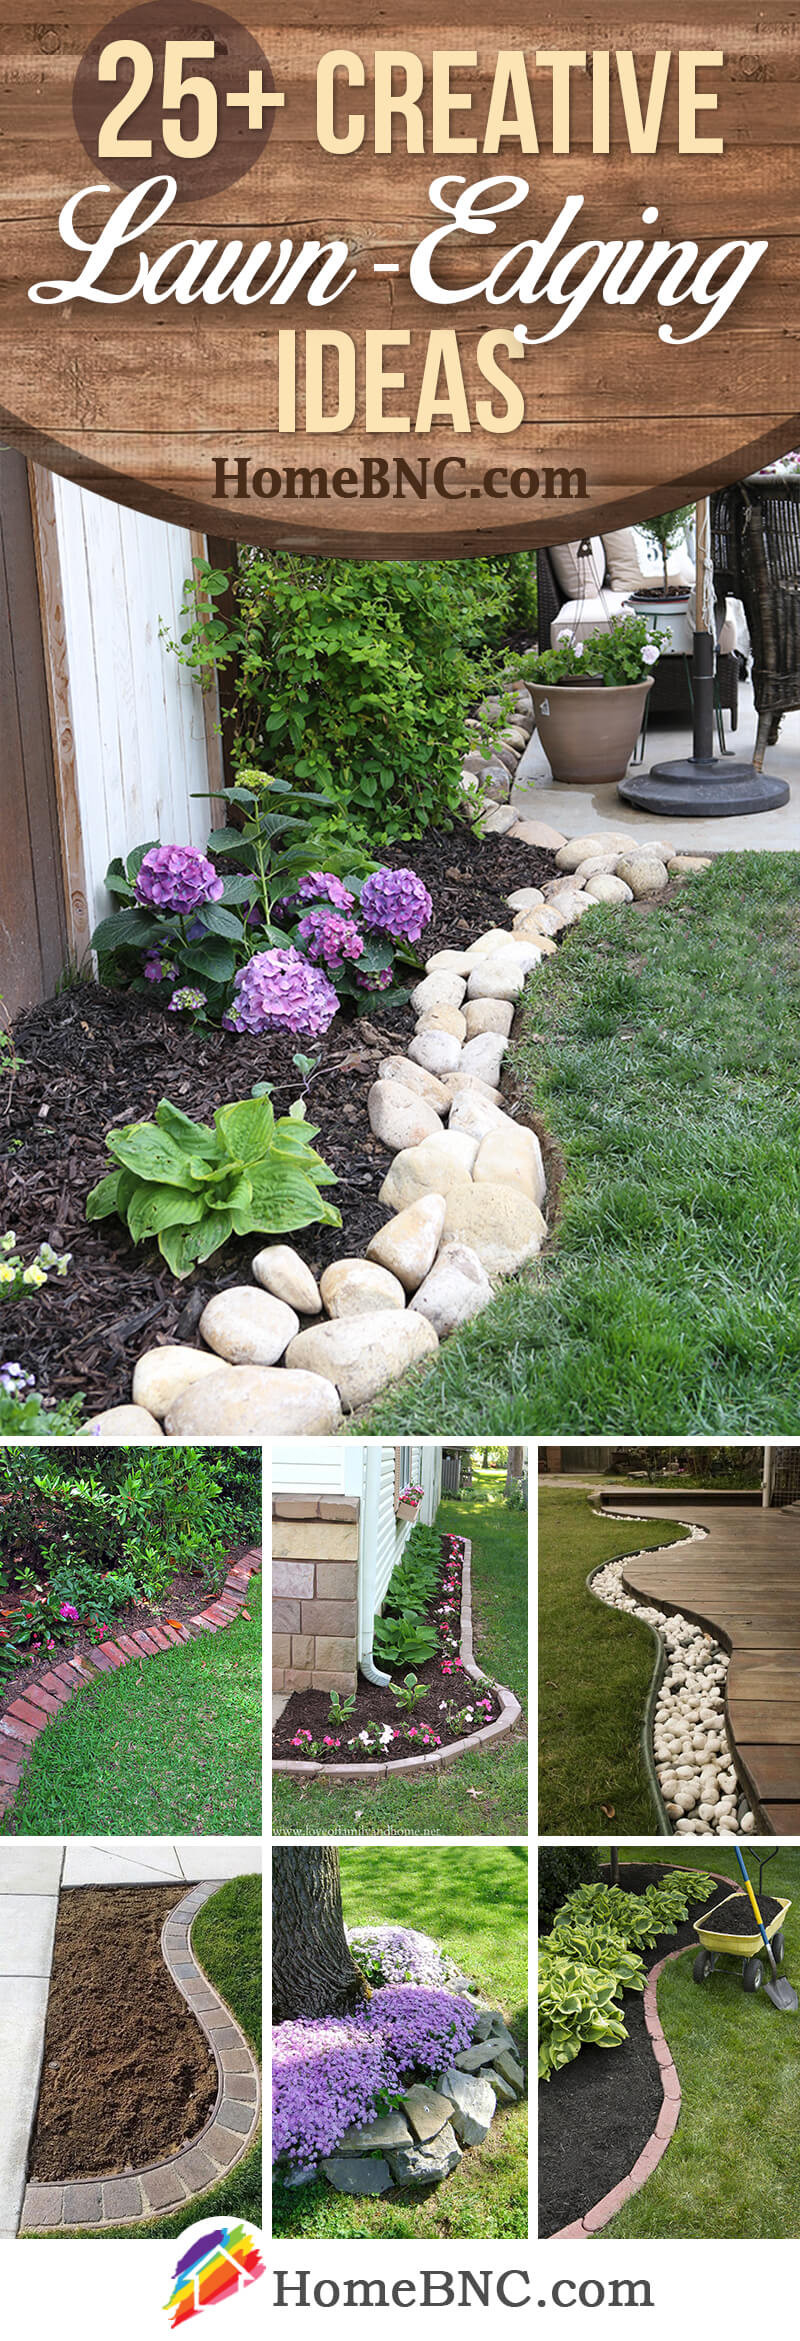 + Best Lawn-Edging Ideas and Designs for